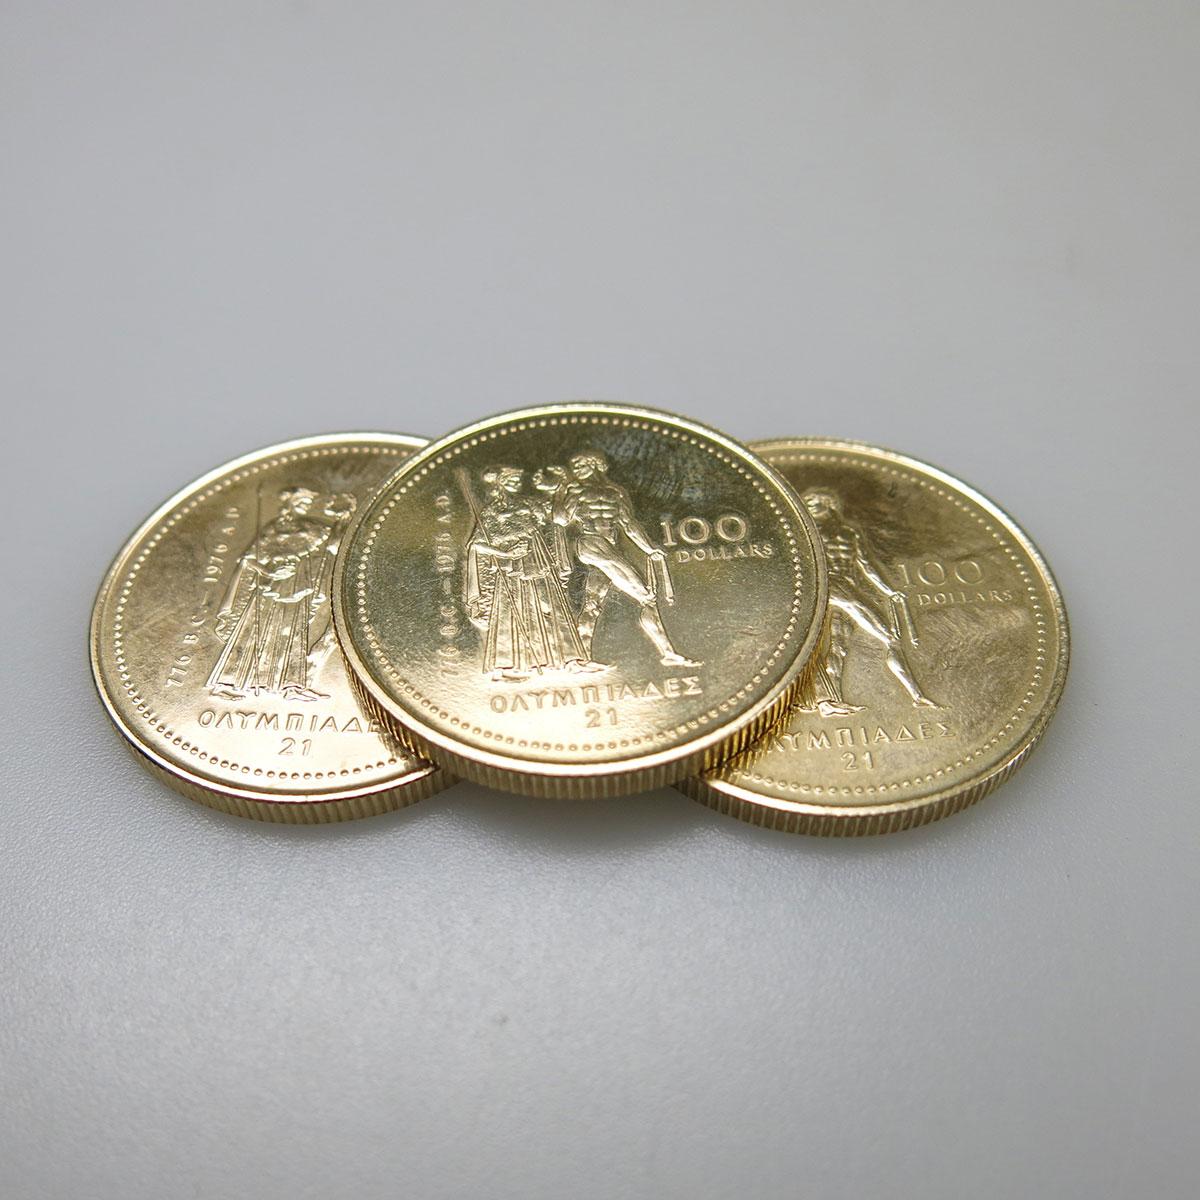 3 X Canadian 14k 1976 $100 Gold Coin